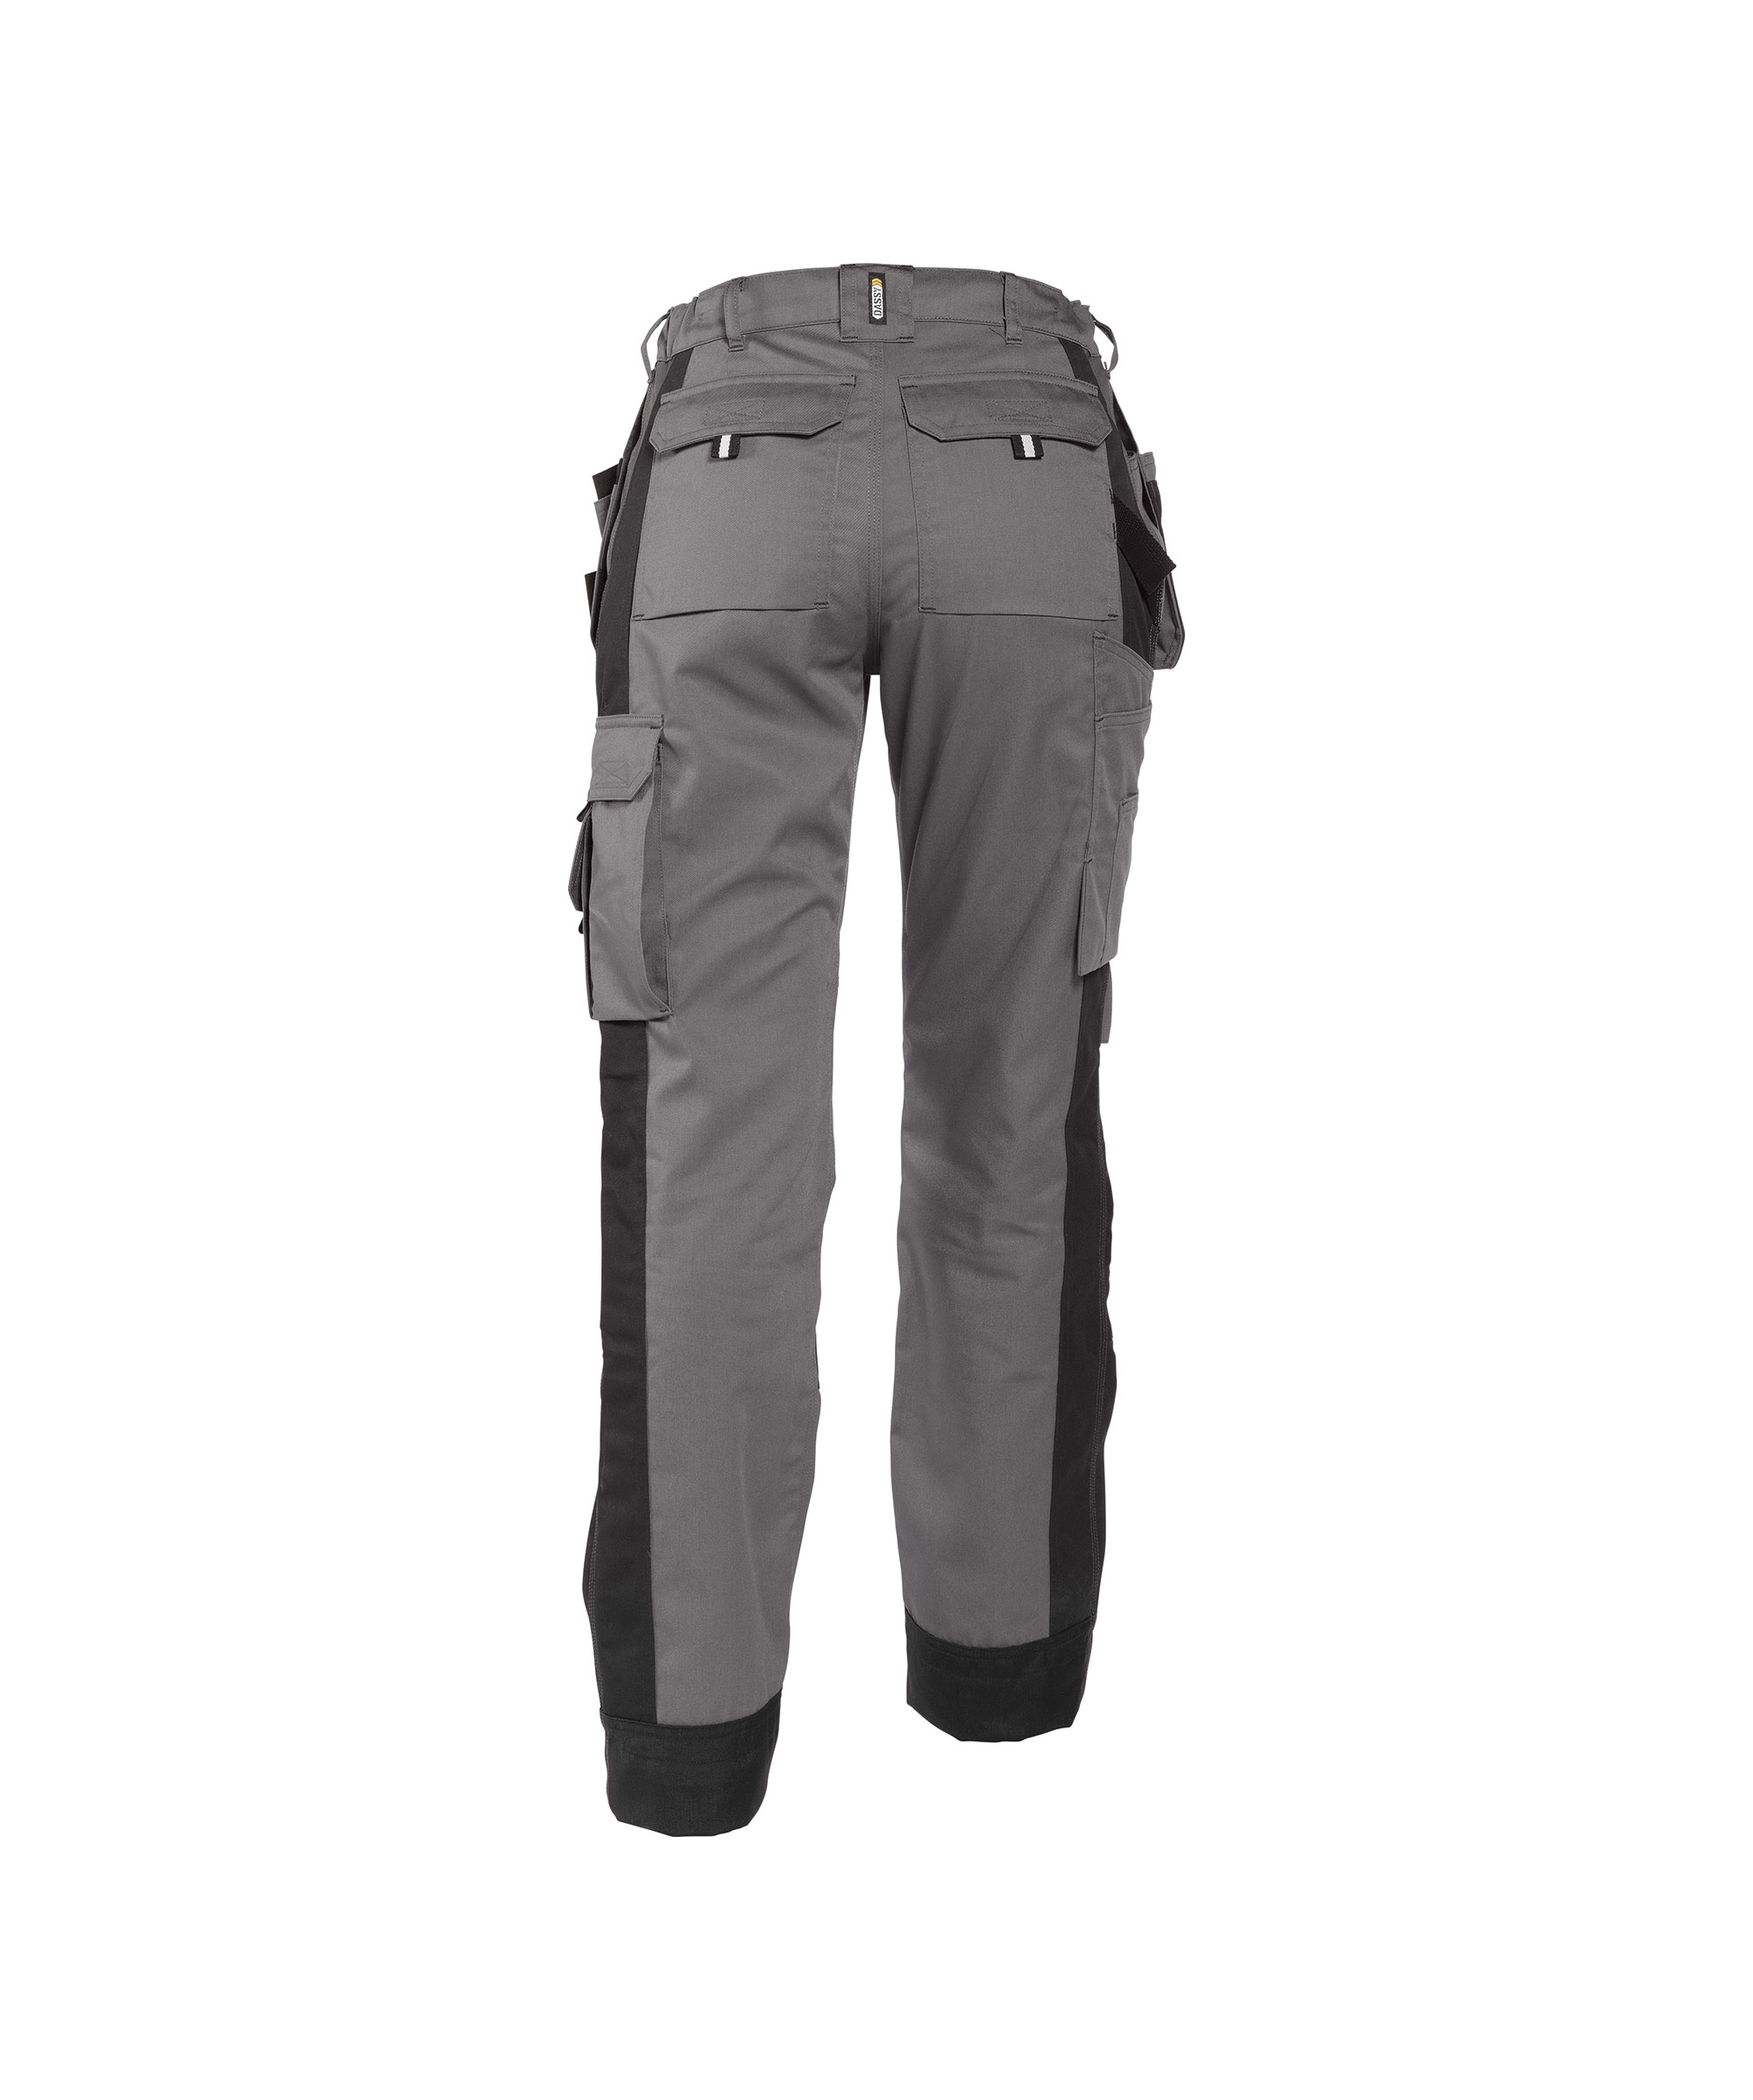 seattle-women_two-tone-work-trousers-with-multi-pockets-and-knee-pockets_cement-grey-black_back.jpg